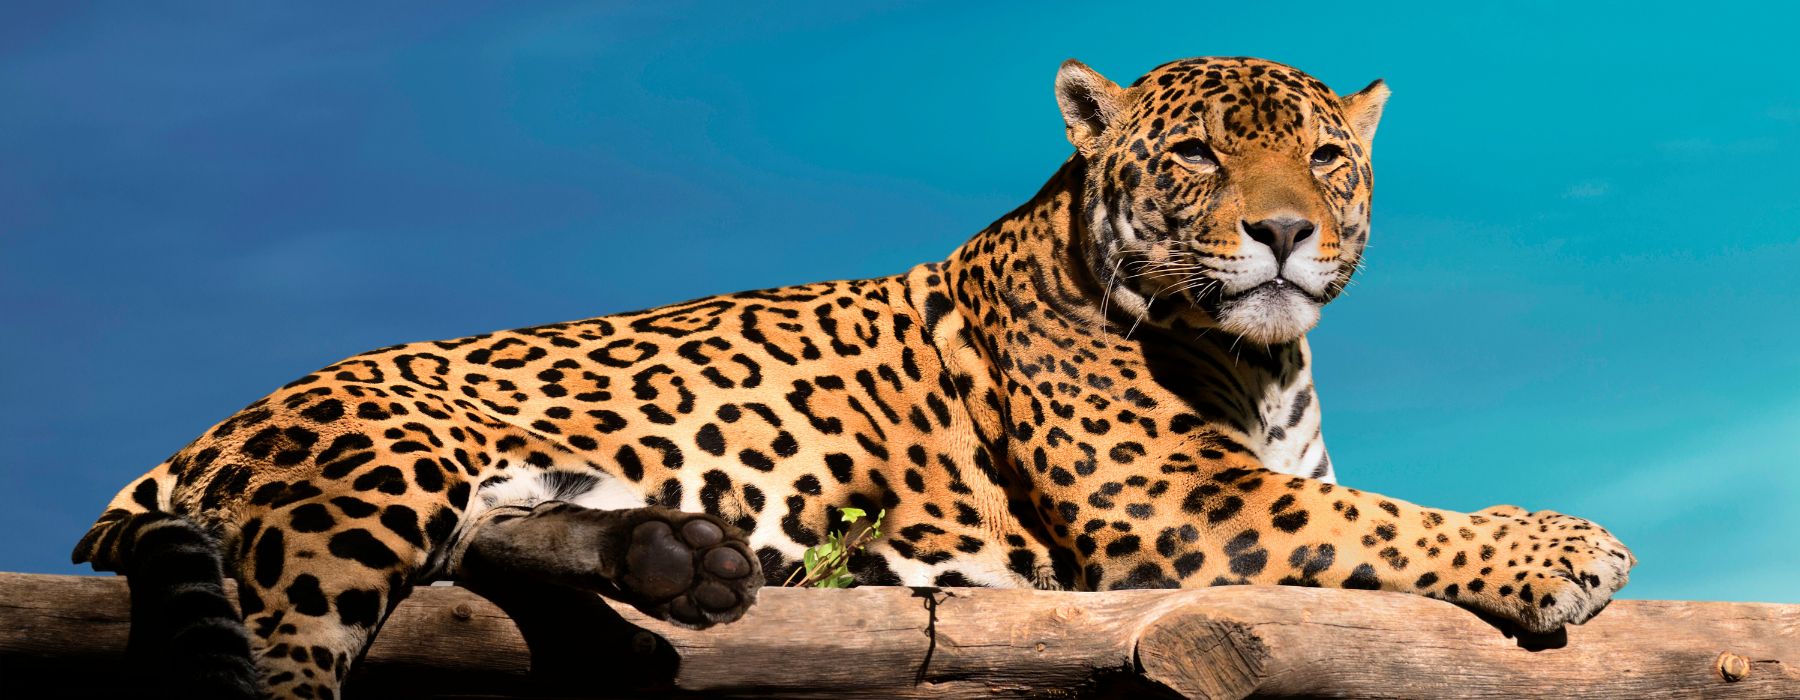 10 INTERESTING FACTS ABOUT JAGUARS